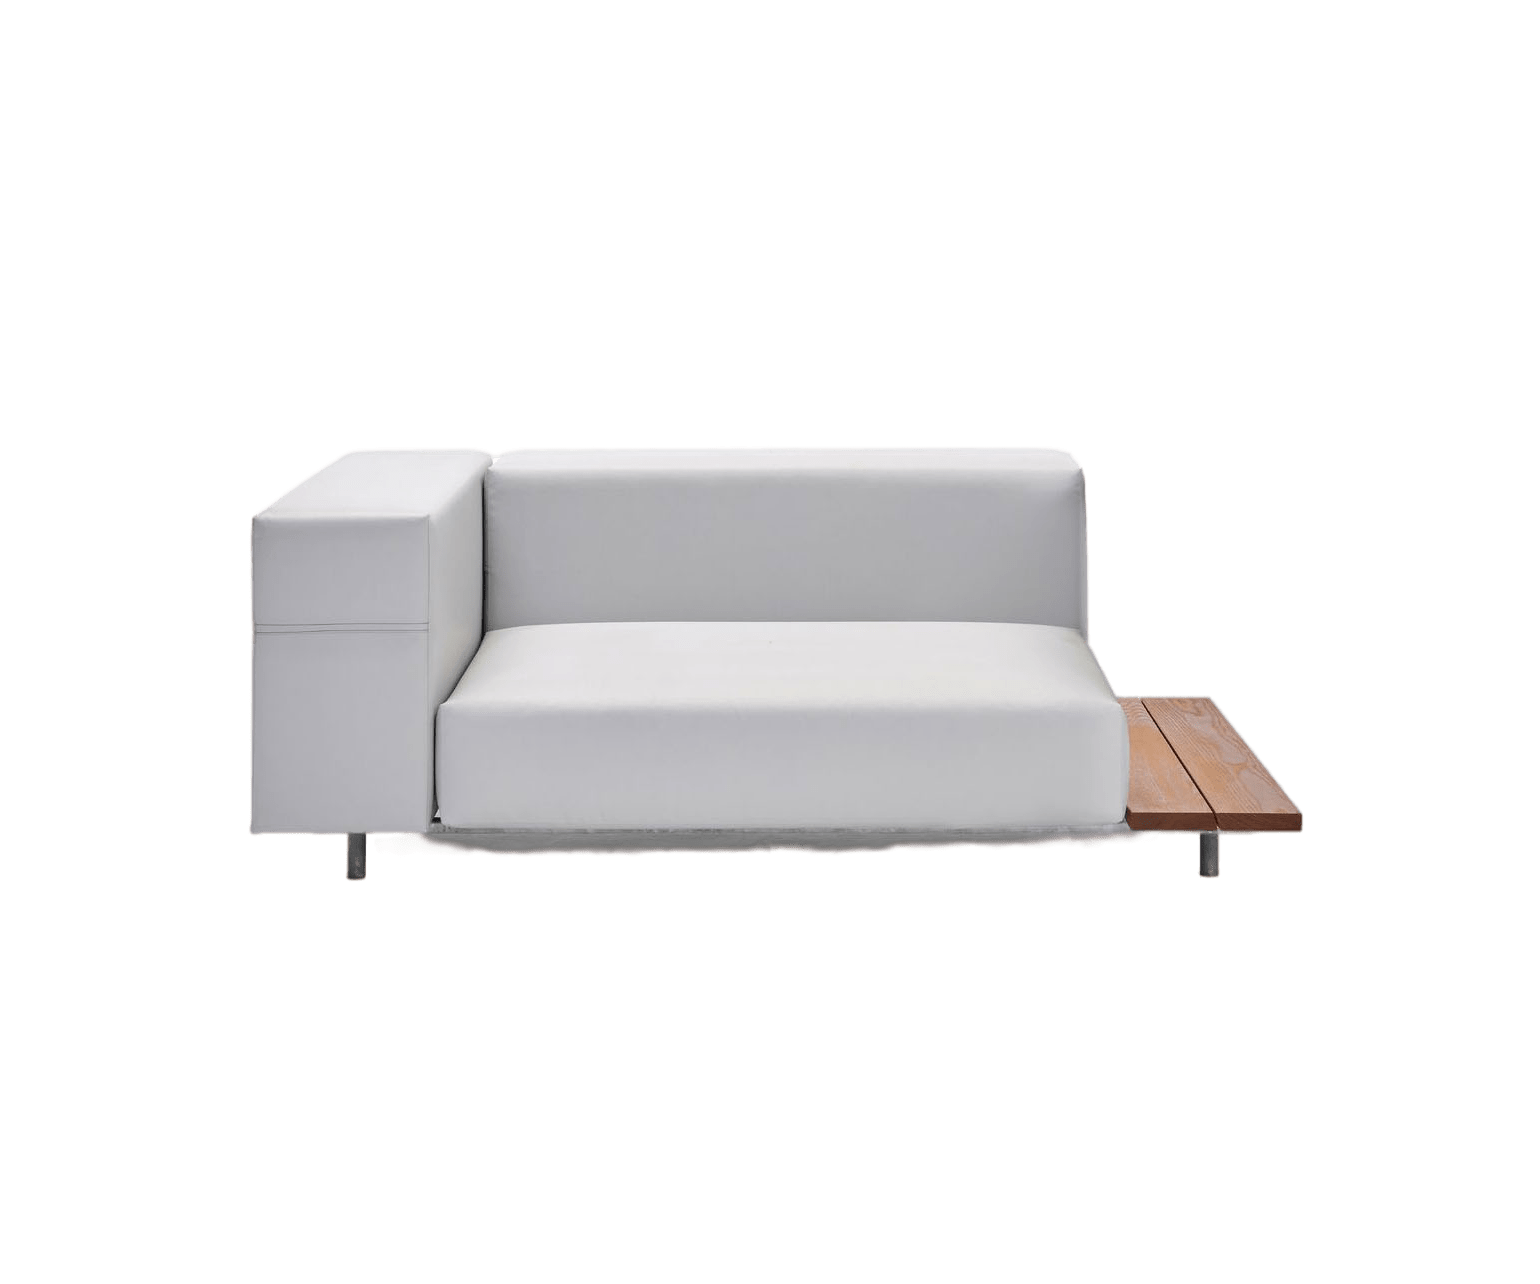 Walrus Corner Seat With Side Table I Extremis